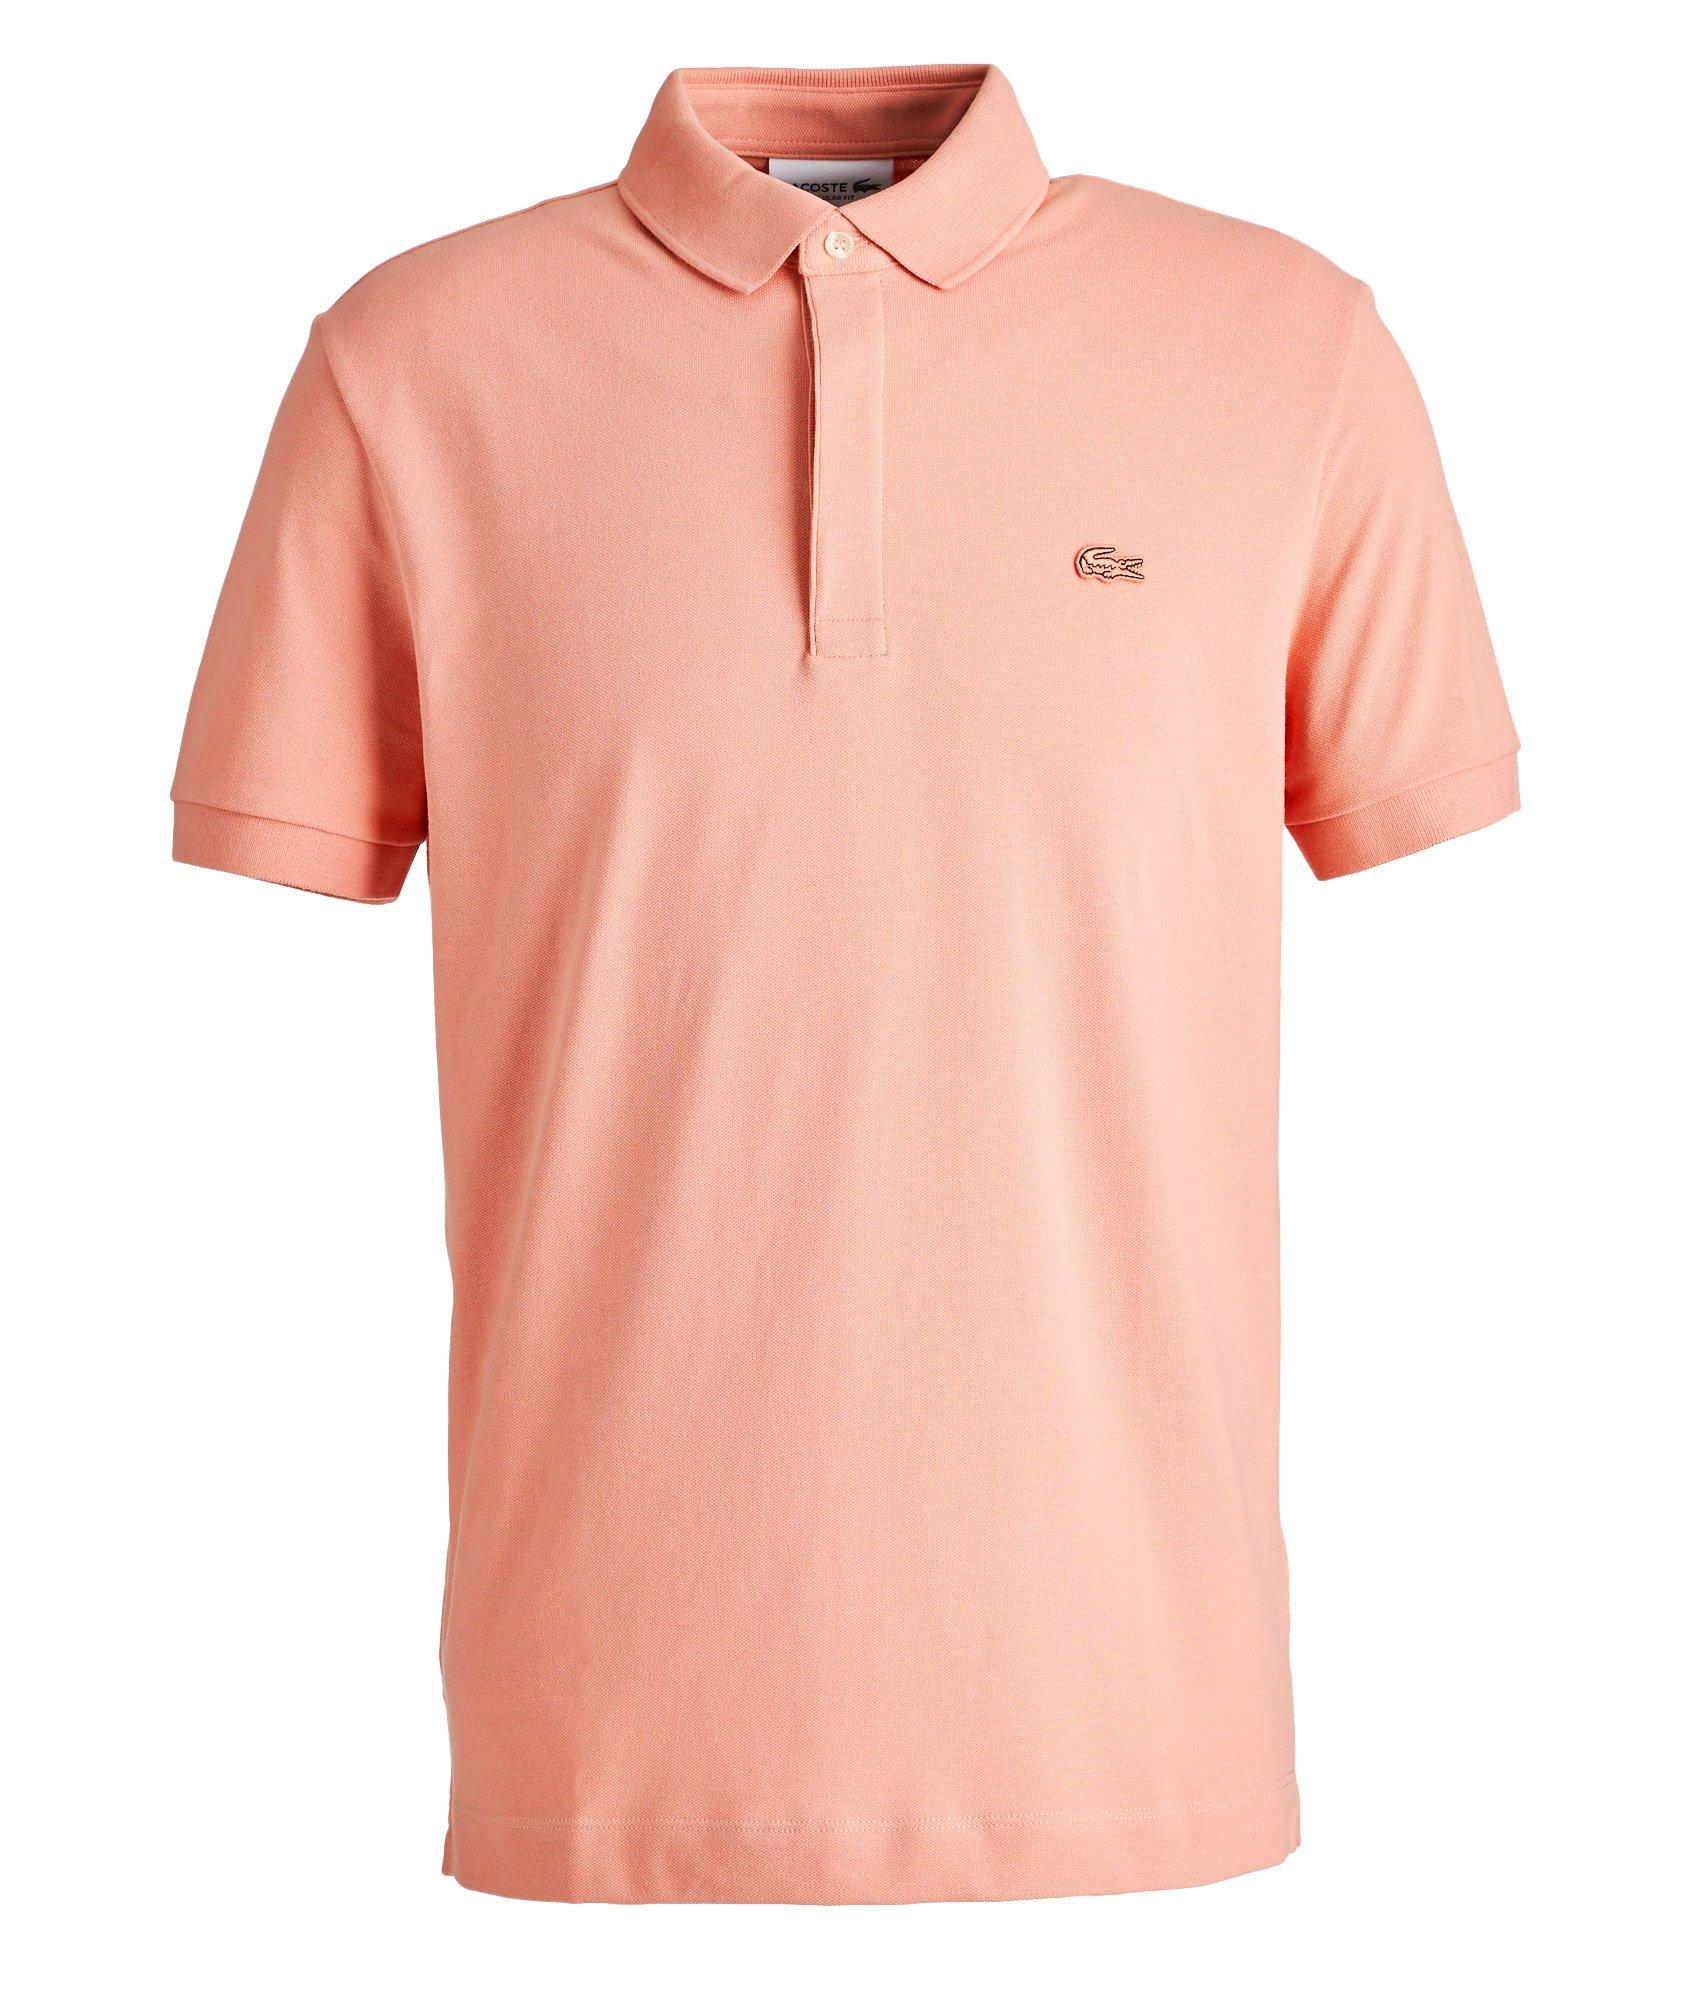 pink lacoste top